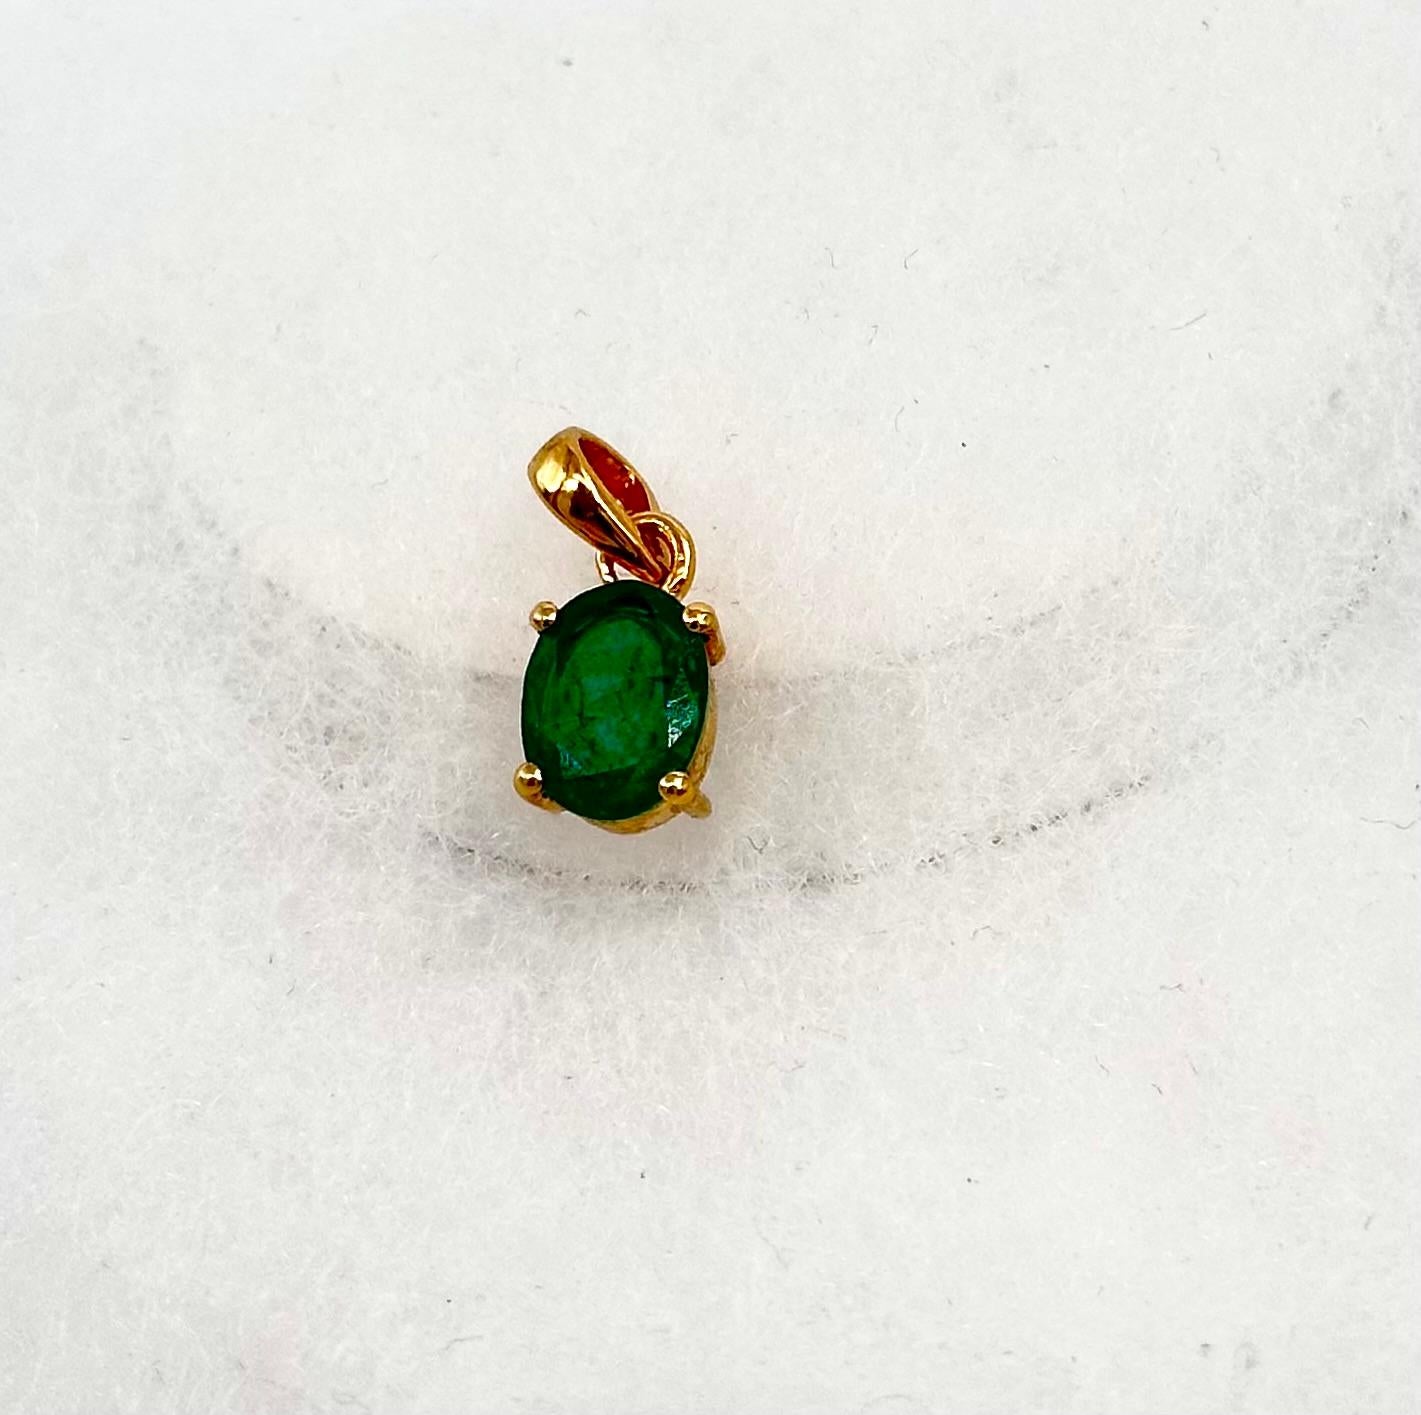 This Stunner Pendant defines class. It completes your everyday look and will also attract special attention on special occasions. This piece of beauty comprises of Natural Zambian Emerald studded in 14K Yellow Gold with excellent diamonds to add